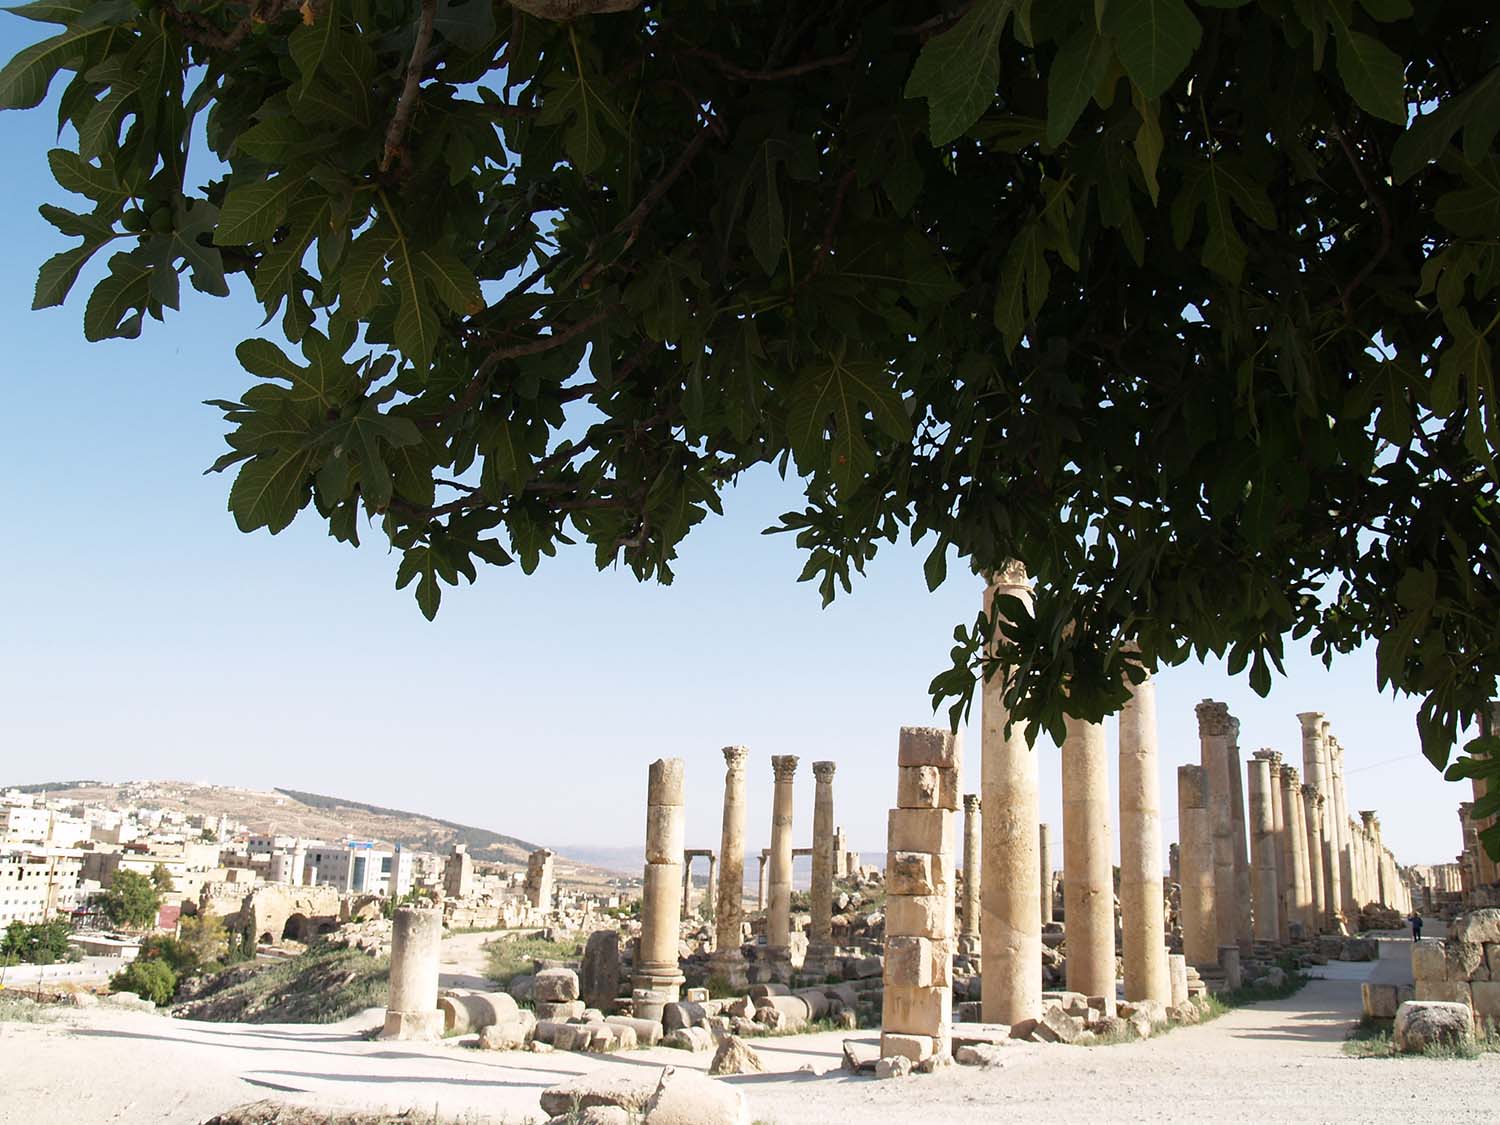 Southward view of Cardo Maximus (right) and Propylaeum Church (center, background)